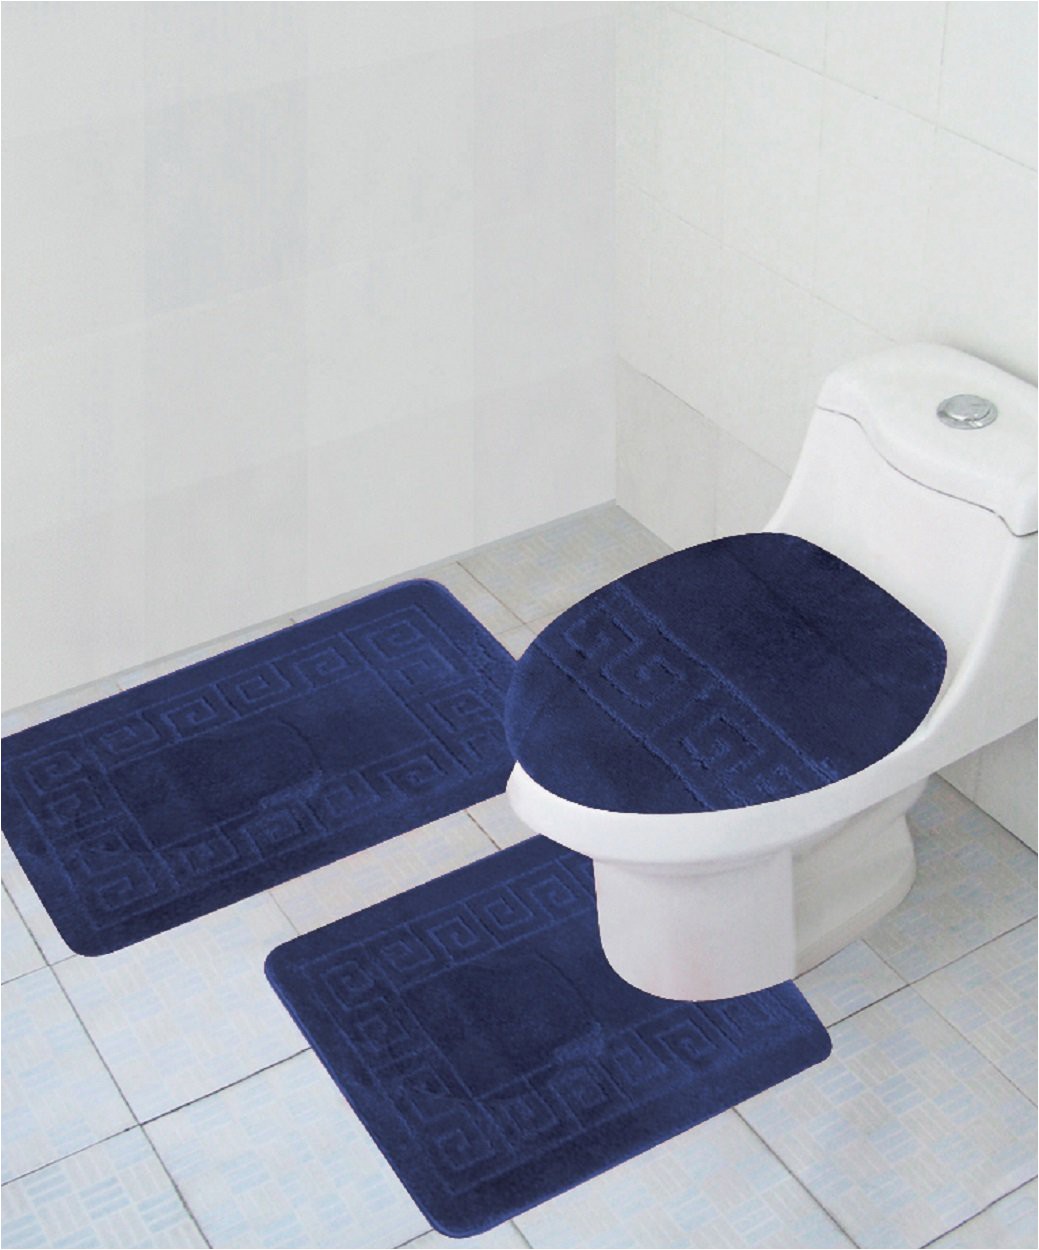 Green Bath Rugs Jcpenney Jcpenney Bathroom Rugs Sets Image Of Bathroom and Closet